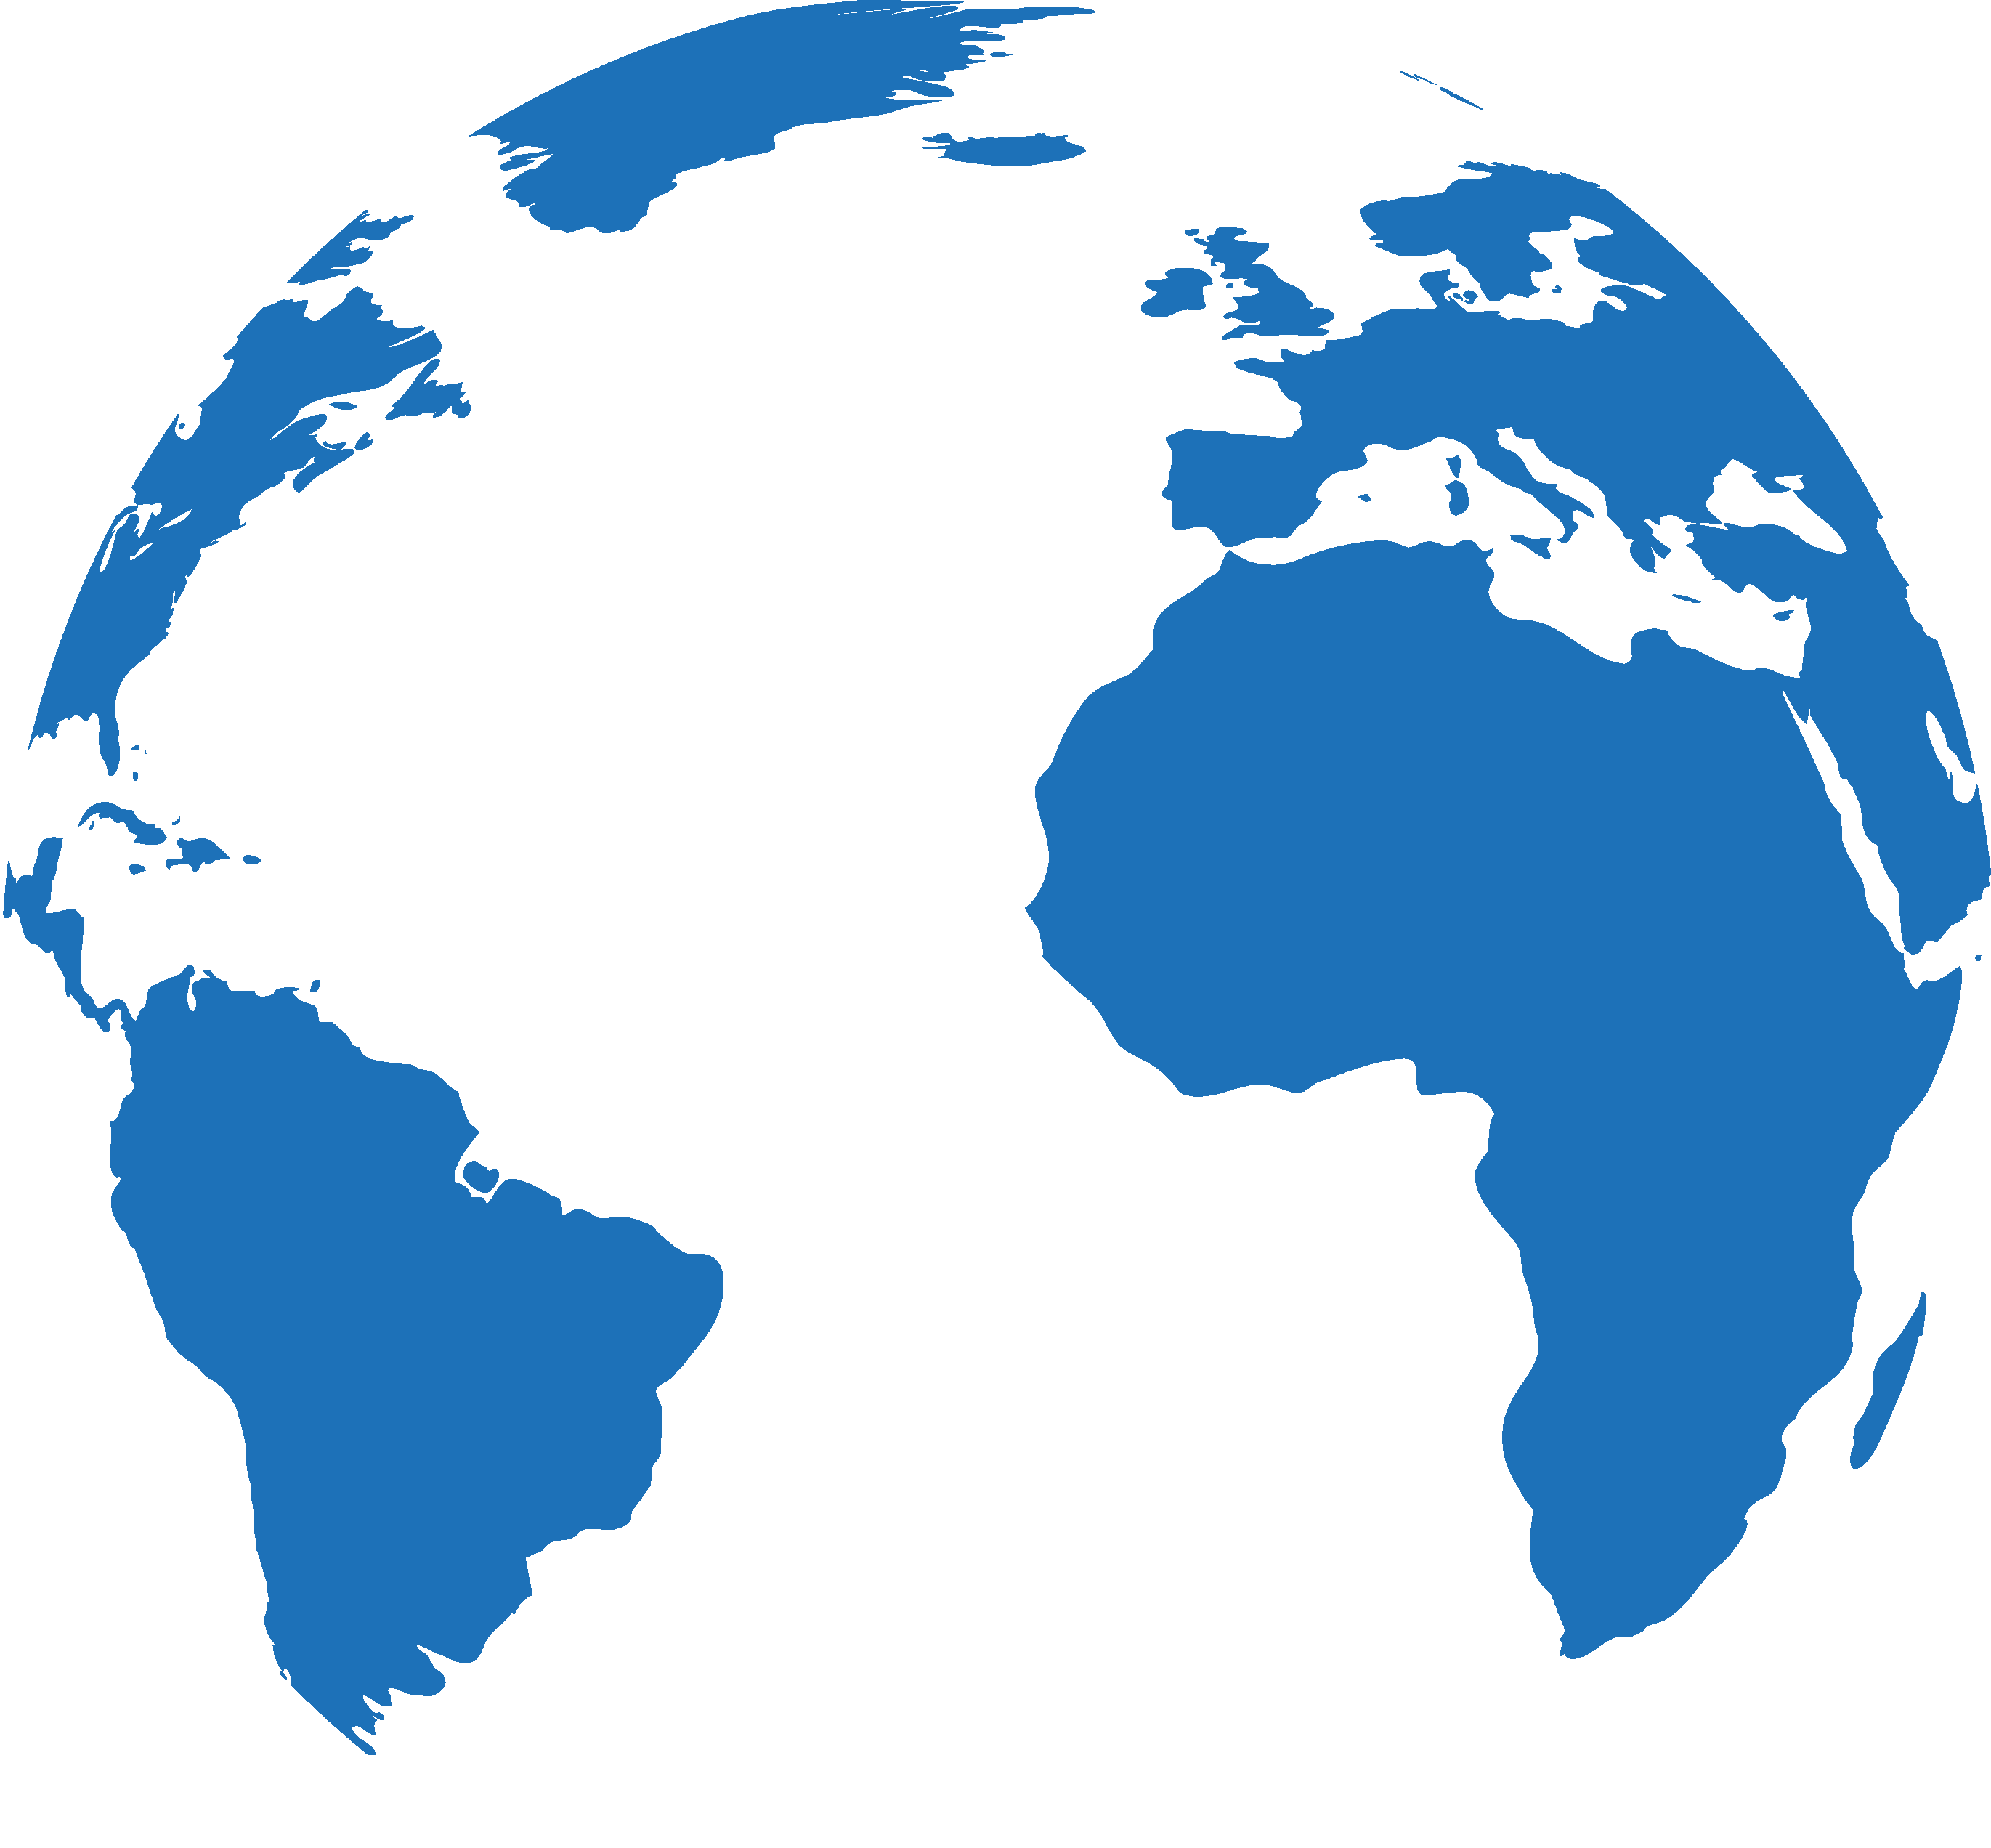 World Map Png Vector Images With Transparent Backgrou - vrogue.co